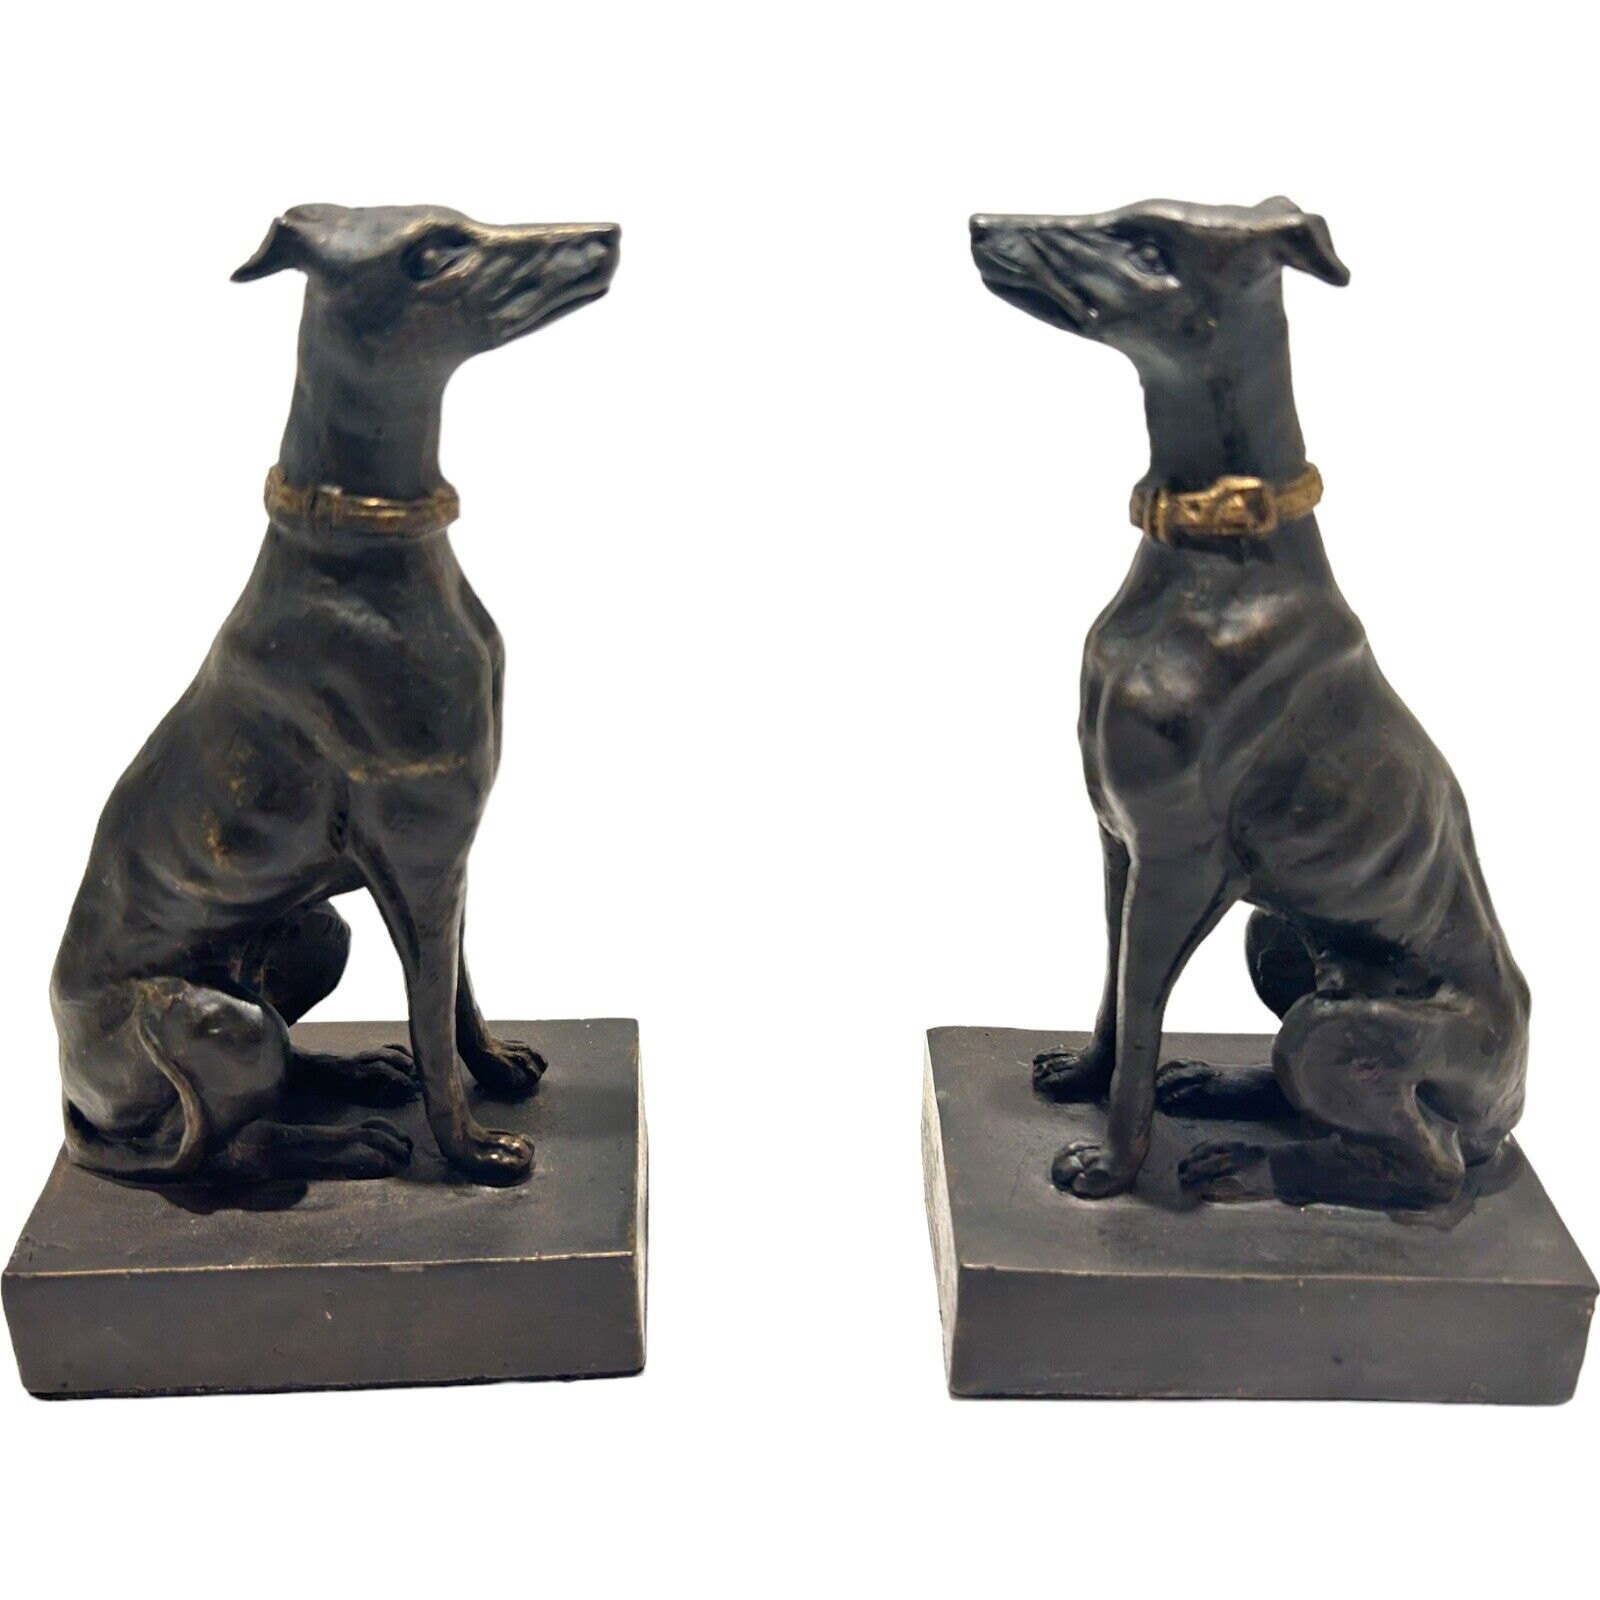 Pair Cast Iron Whippet Gray hound Dog Figures W/Fine Casting Statues Bookends